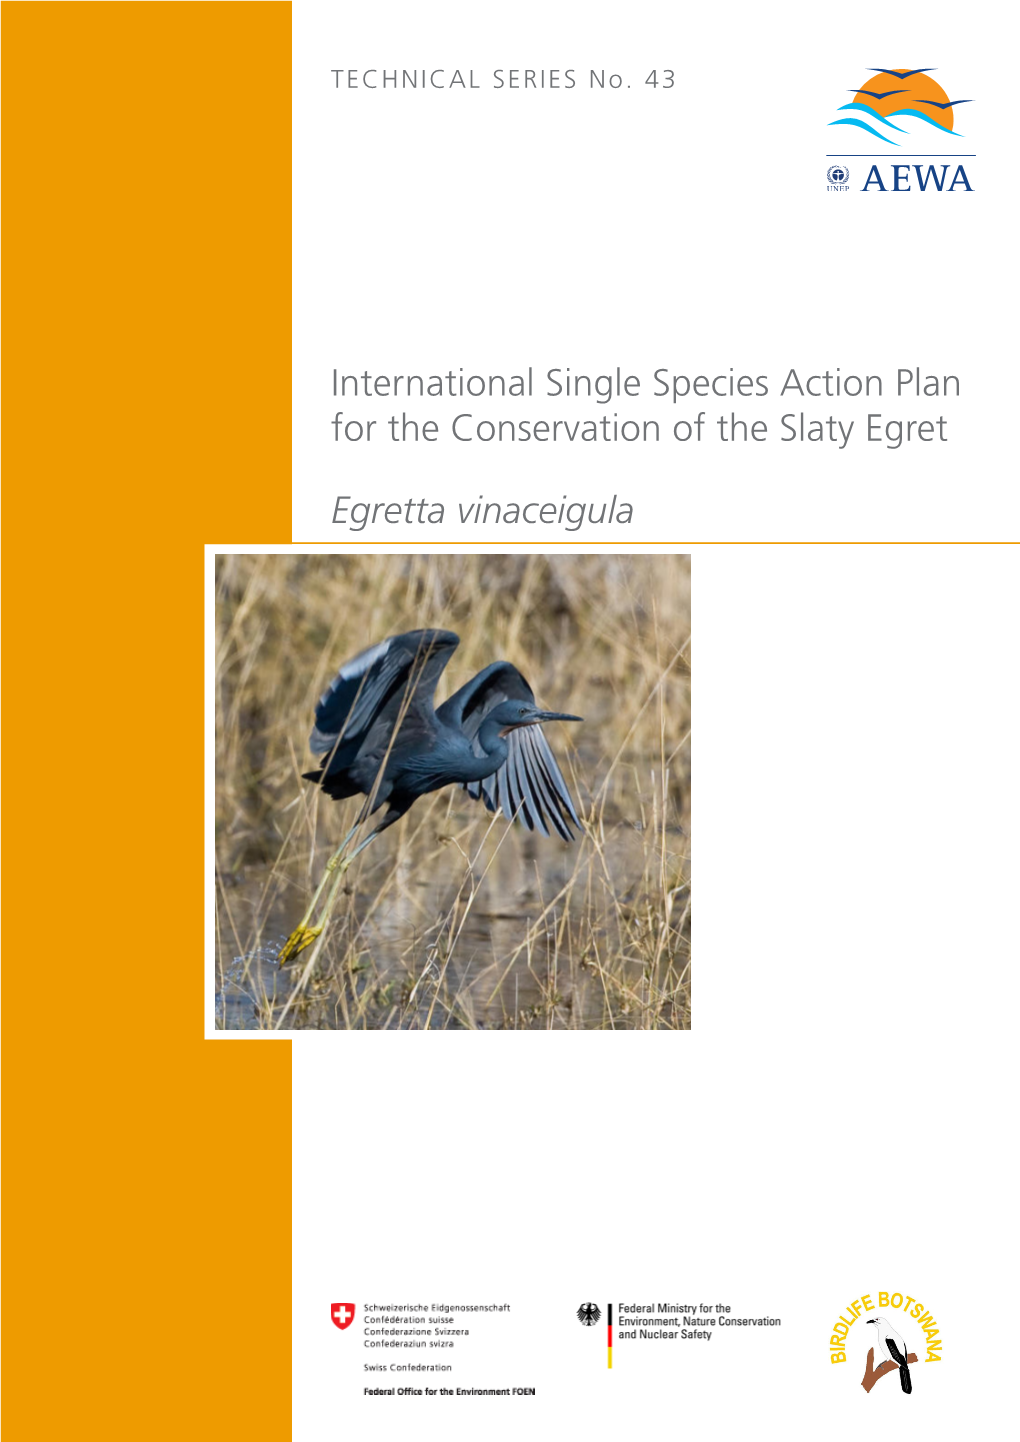 (AEWA) International Single Species Action Plan for the Conservation Of